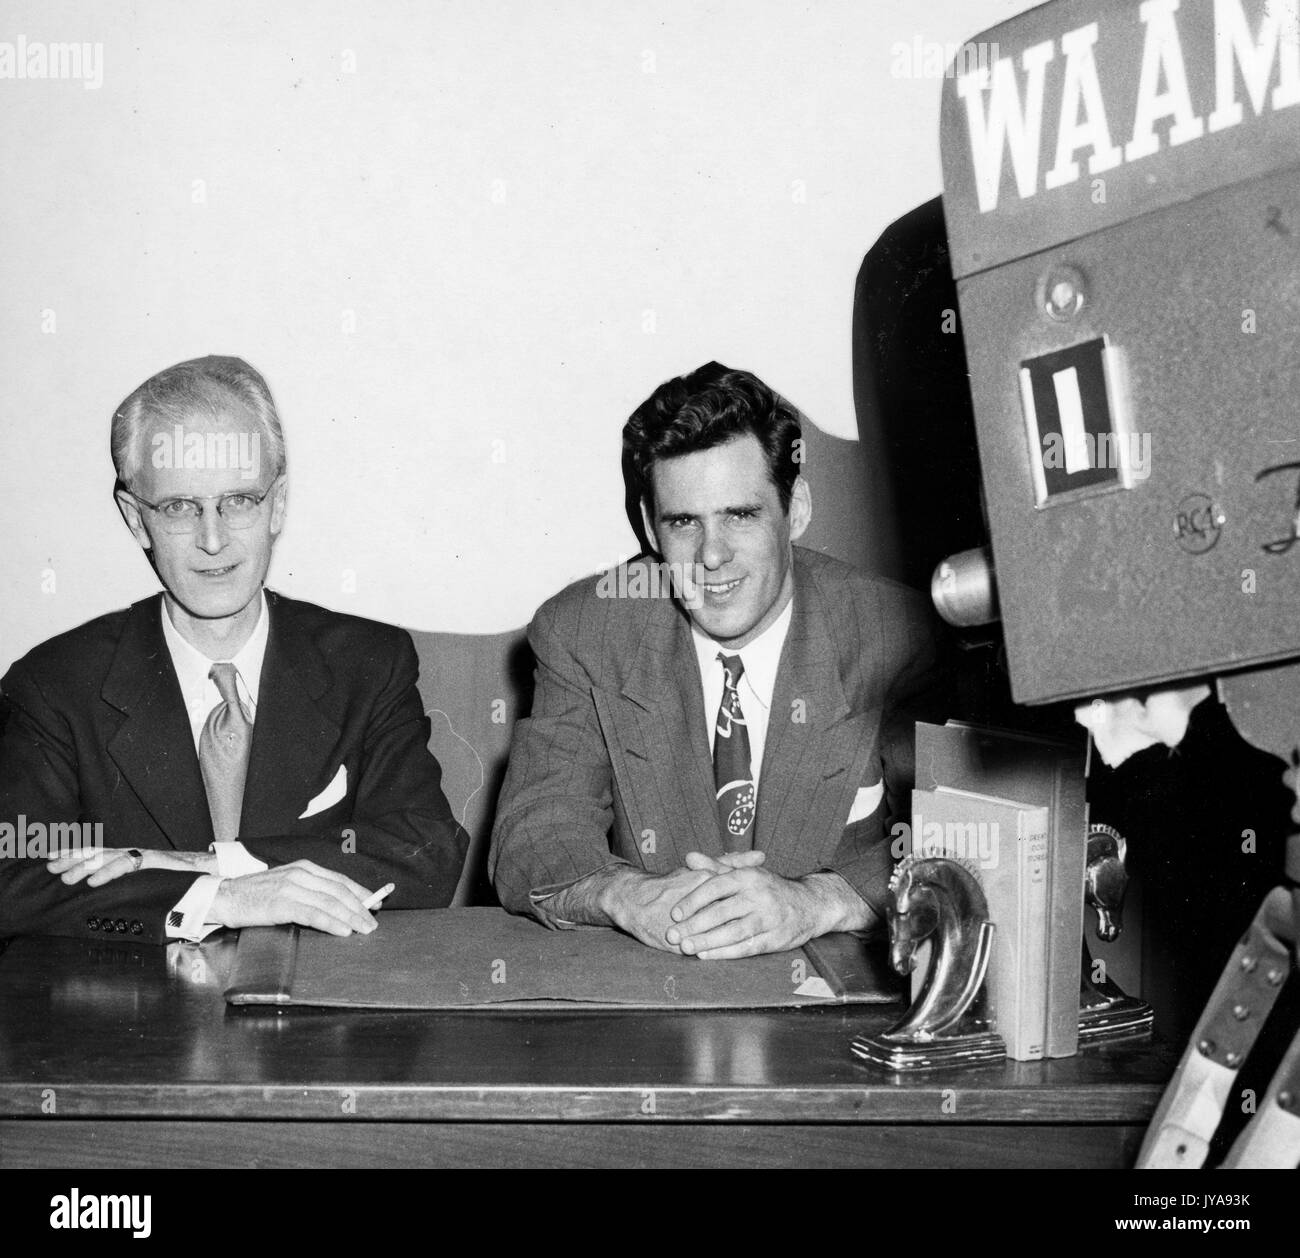 American television host Lynn Poole (left) on set of the Johns Hopkins Science Review television program with producer and director Anthony Farrar (right), 1951. Stock Photo